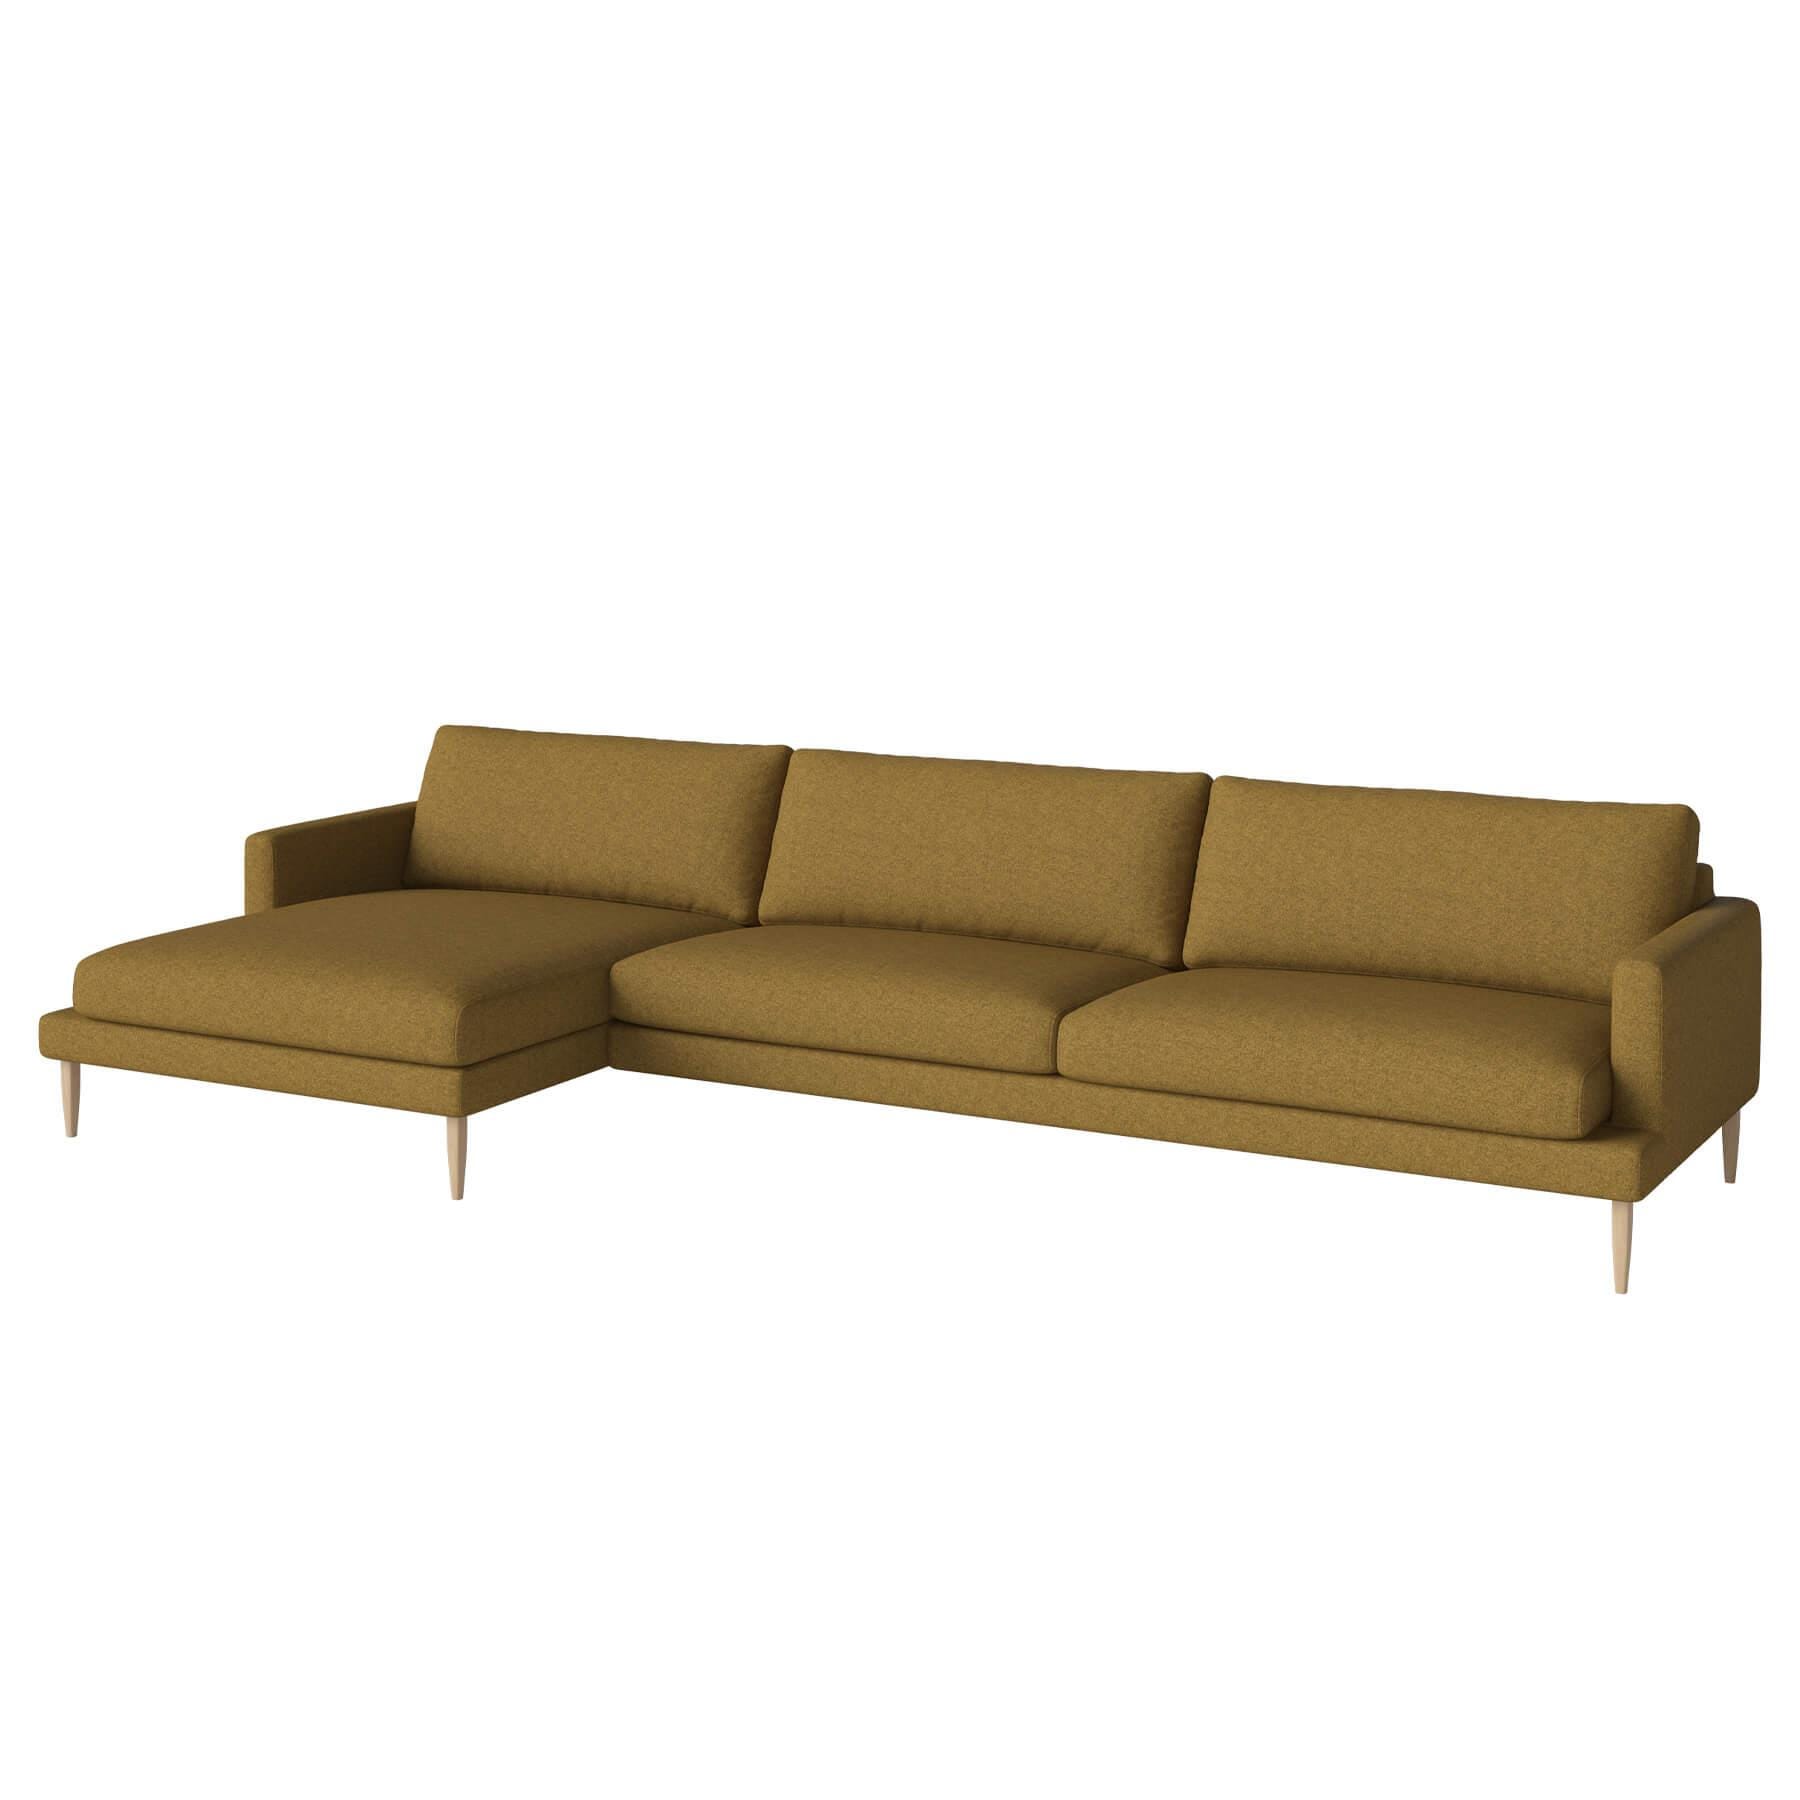 Bolia Veneda Sofa 45 Seater Sofa With Chaise Longue White Oiled Oak Qual Curry Left Brown Designer Furniture From Holloways Of Ludlow